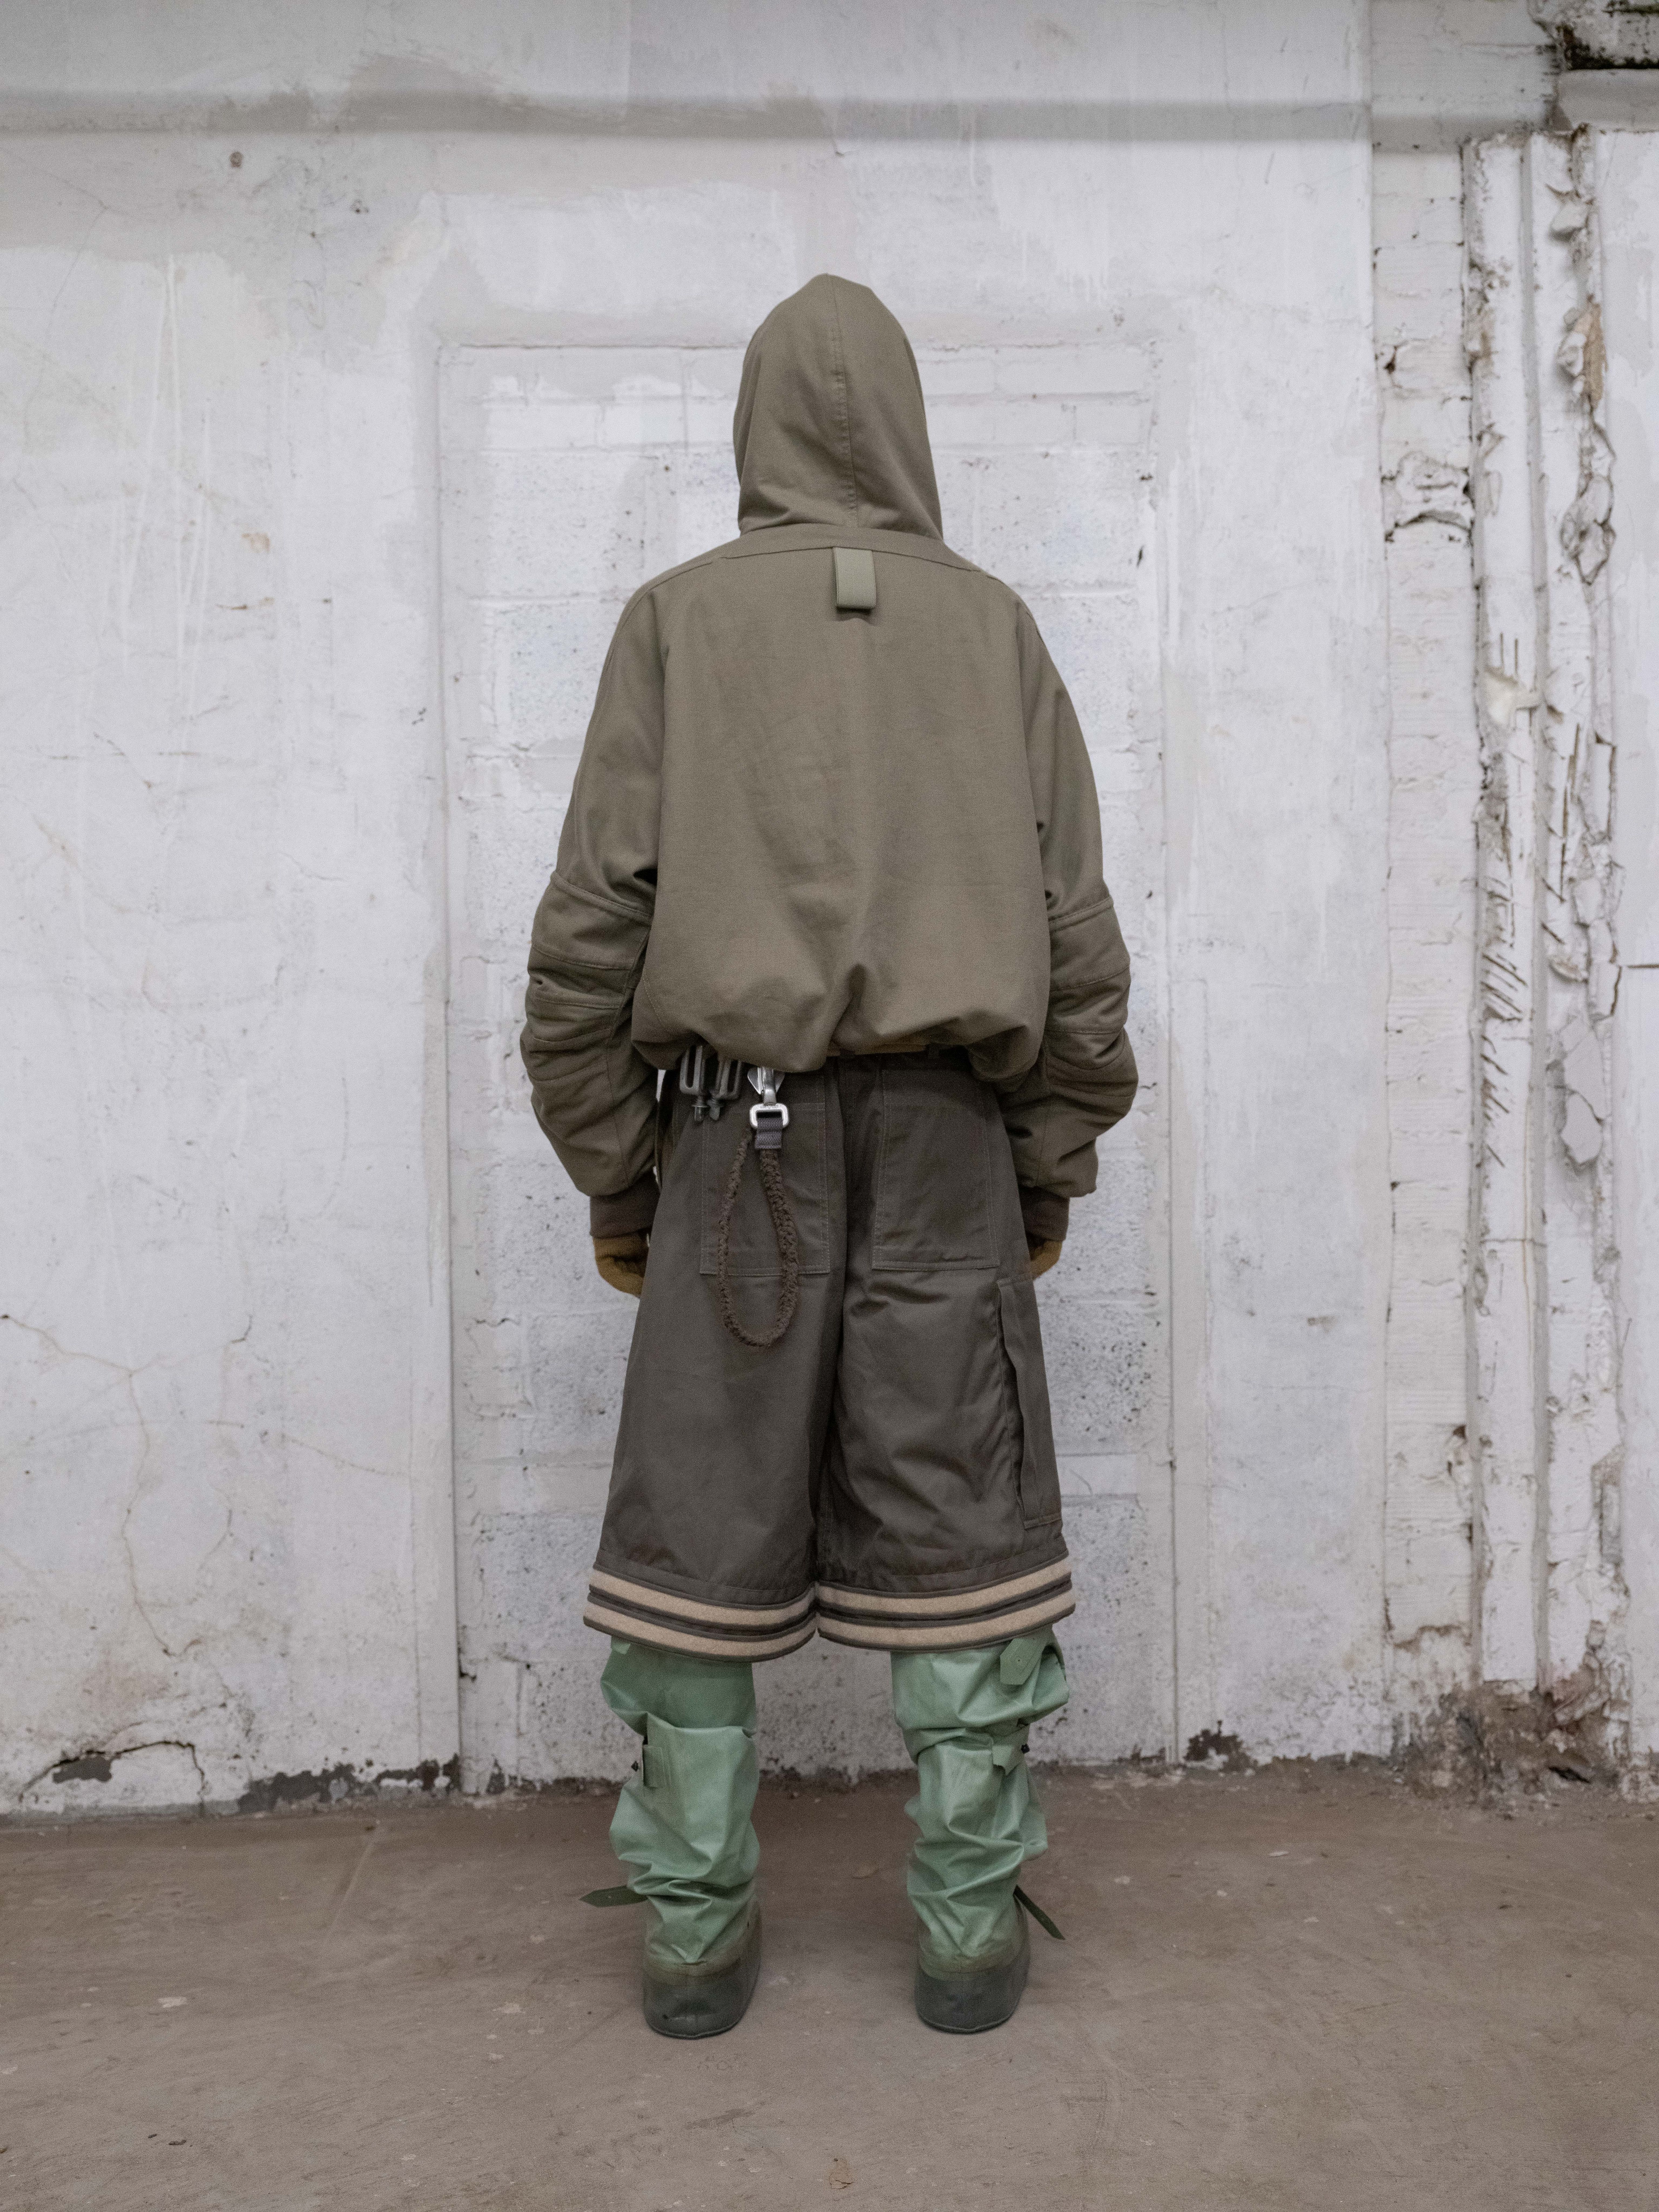 back view of man wearing mk olive jacket, bandolier belt with metal objects, cover boots and air bermudas from bryan jimenez fall/winter 2022